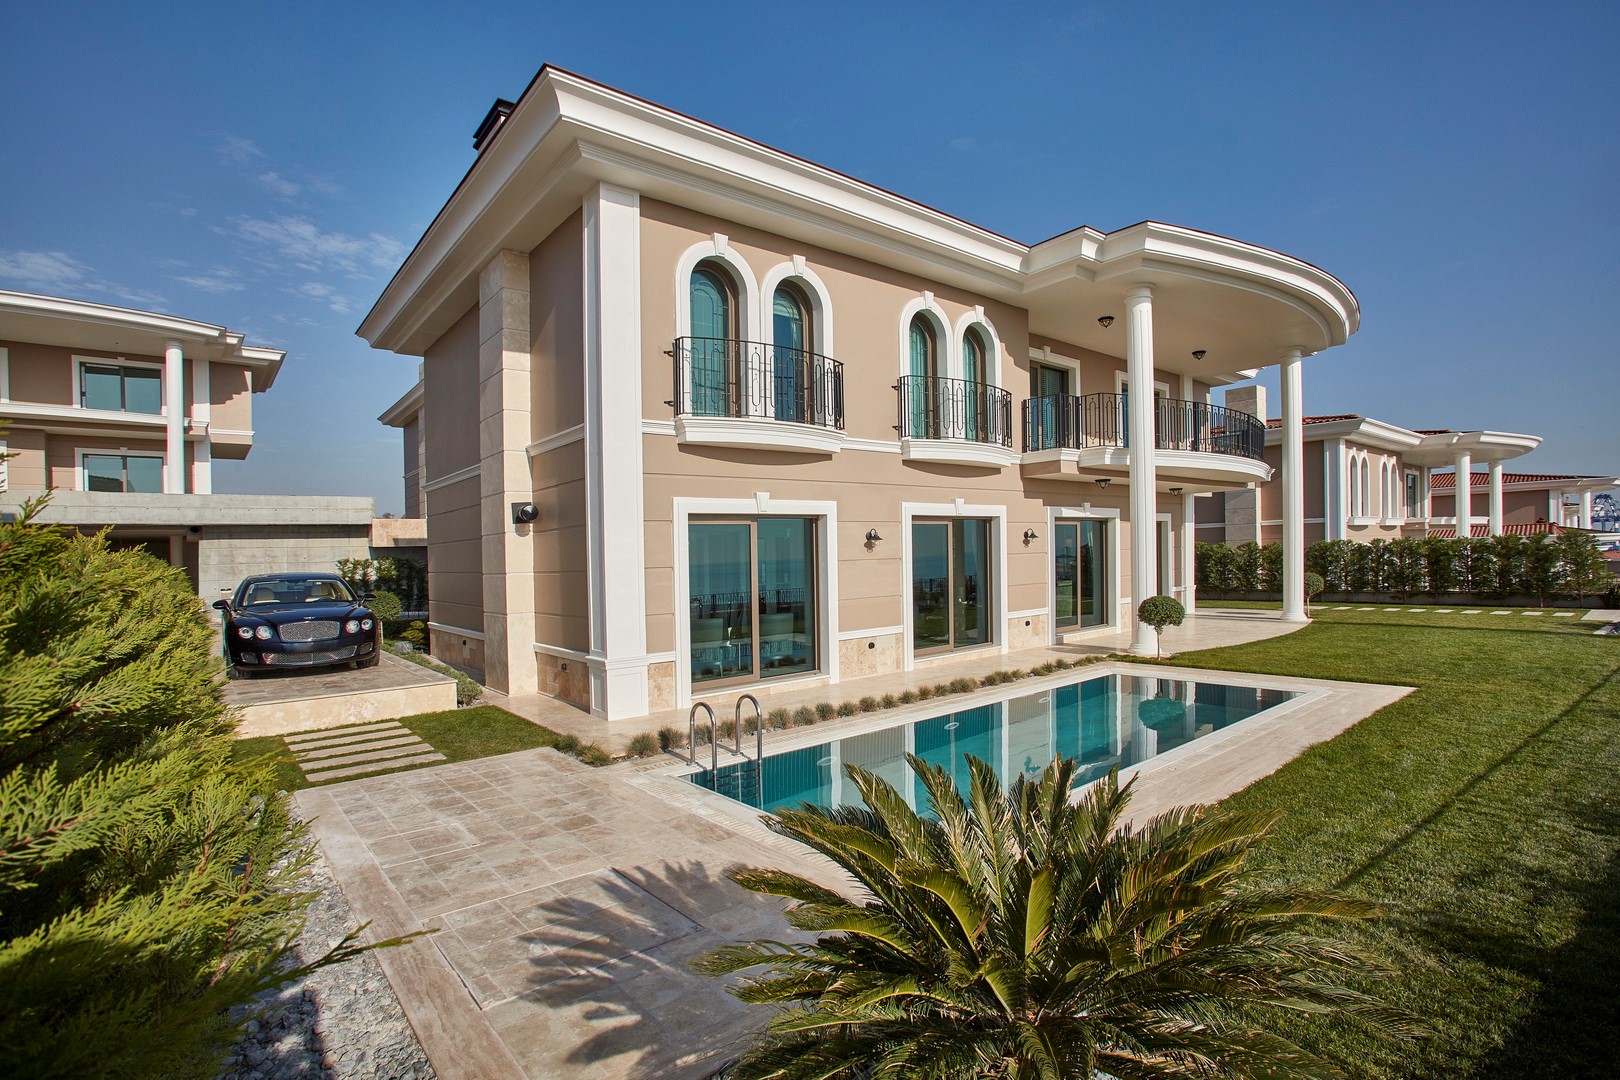 HERE IS THE IDEAL VILLA